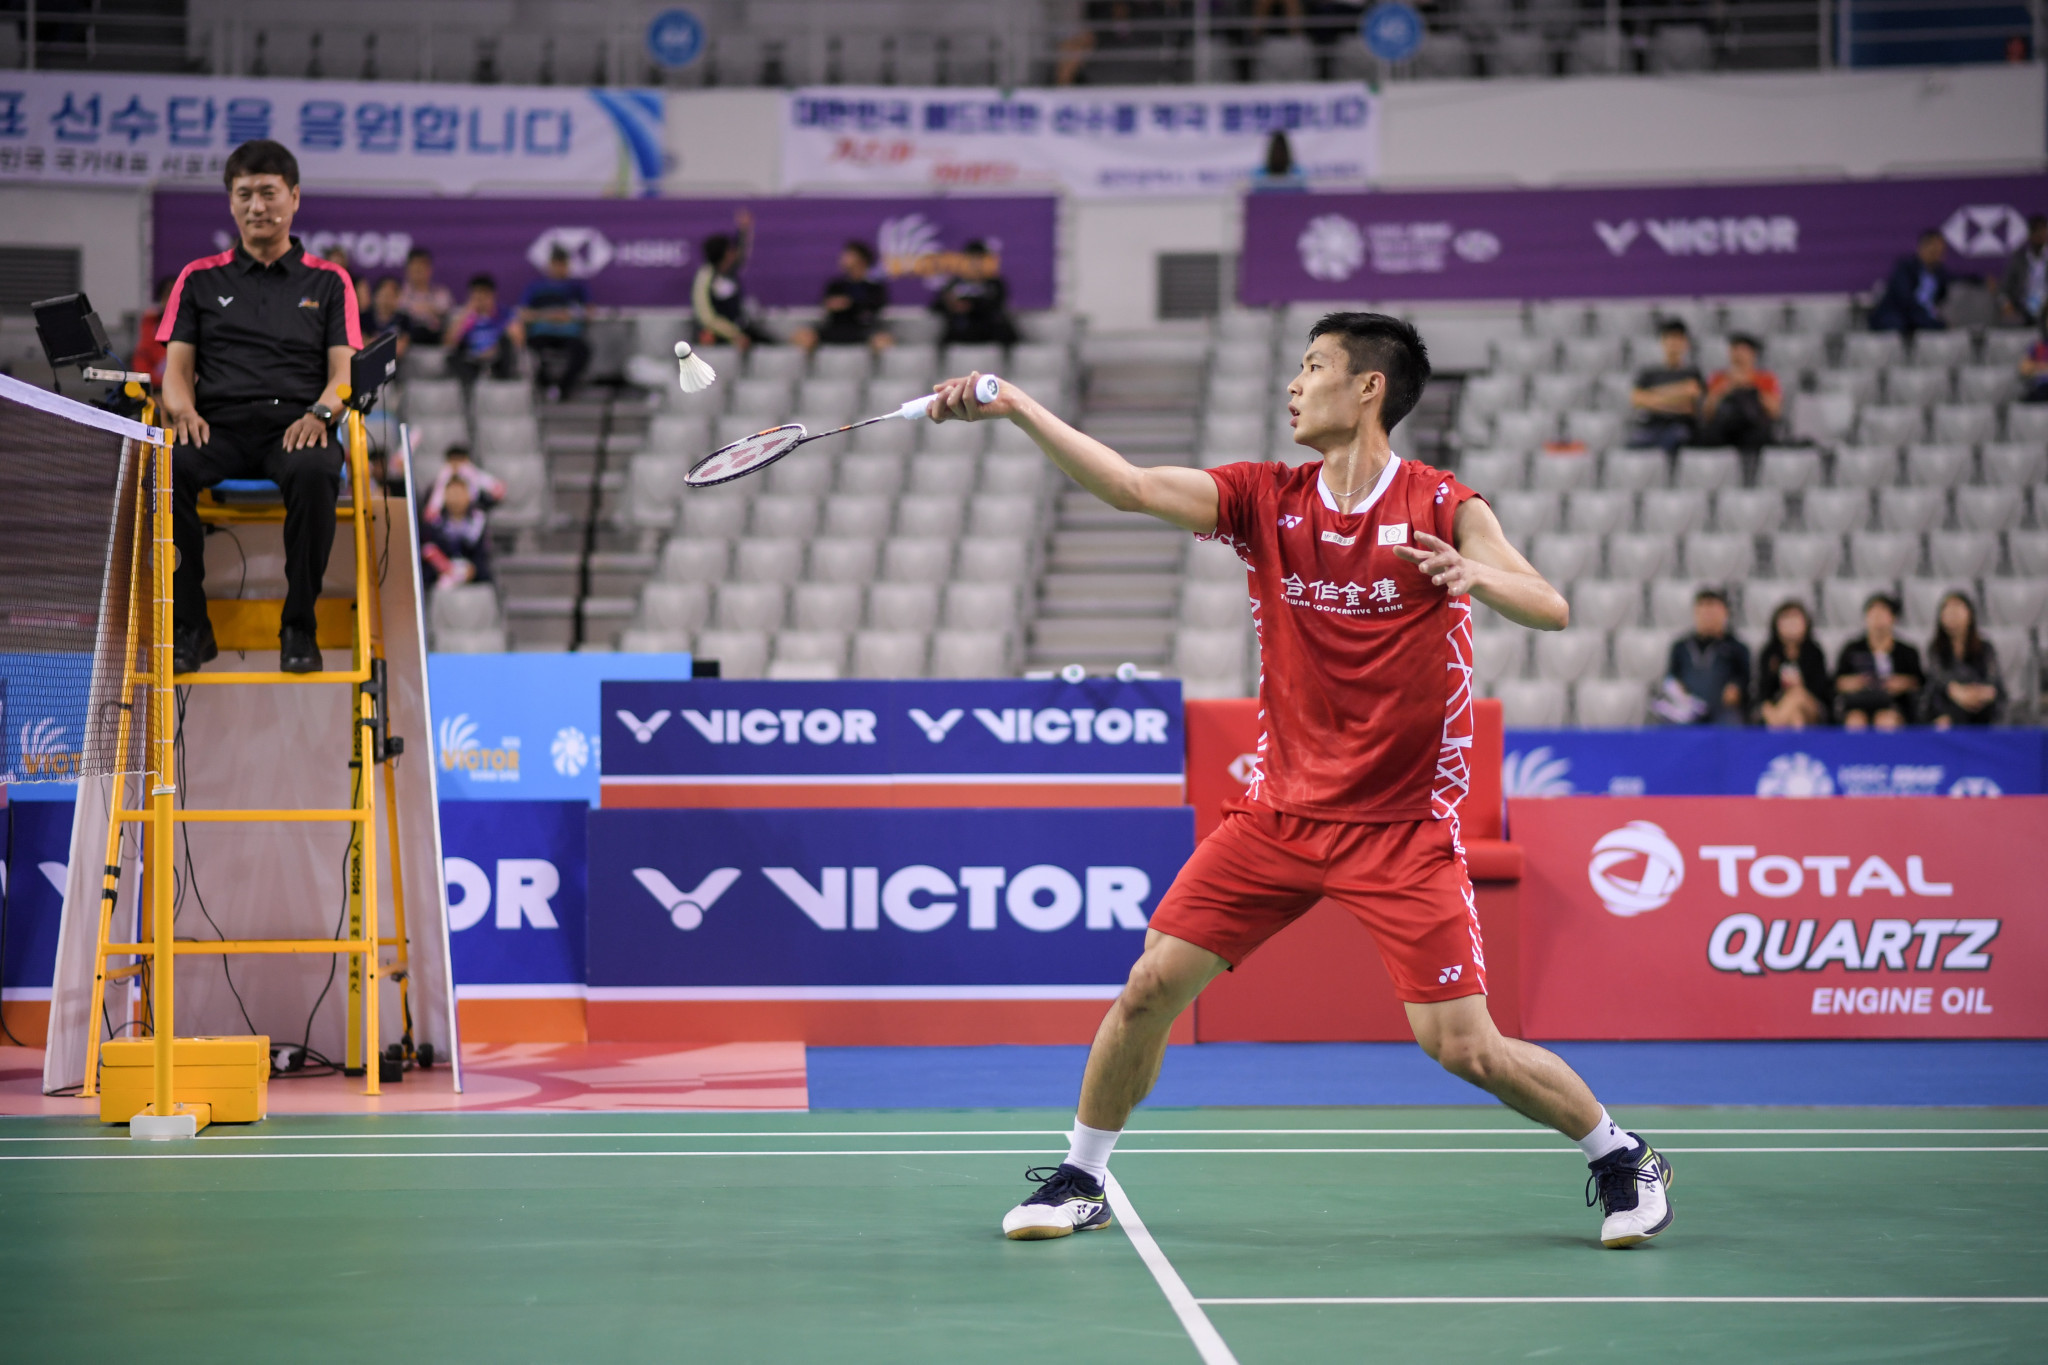 Chou Tien Chen advanced in the men's draw ©Getty Images